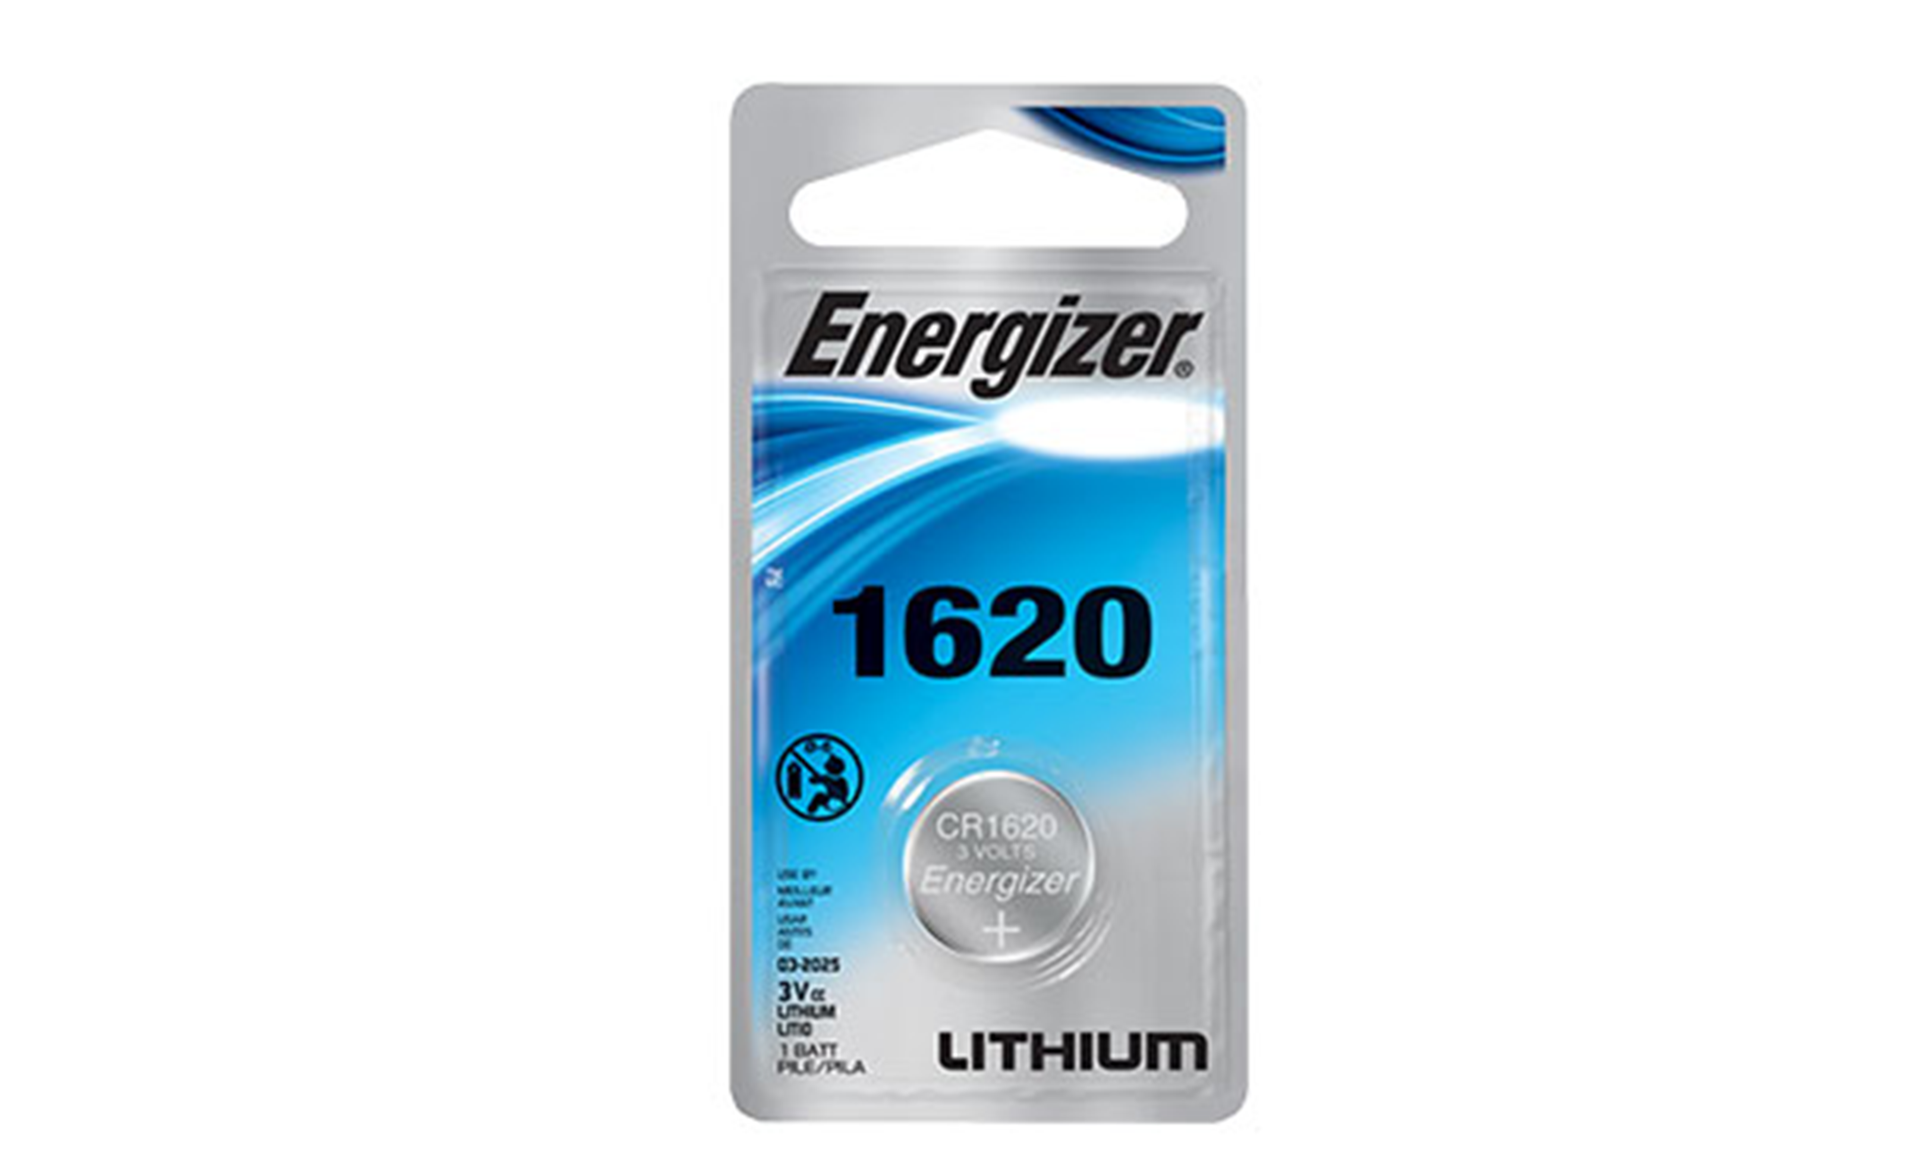 Energizer CR1620 Battery Lithium Coin Cell (1PC Blister Pack)